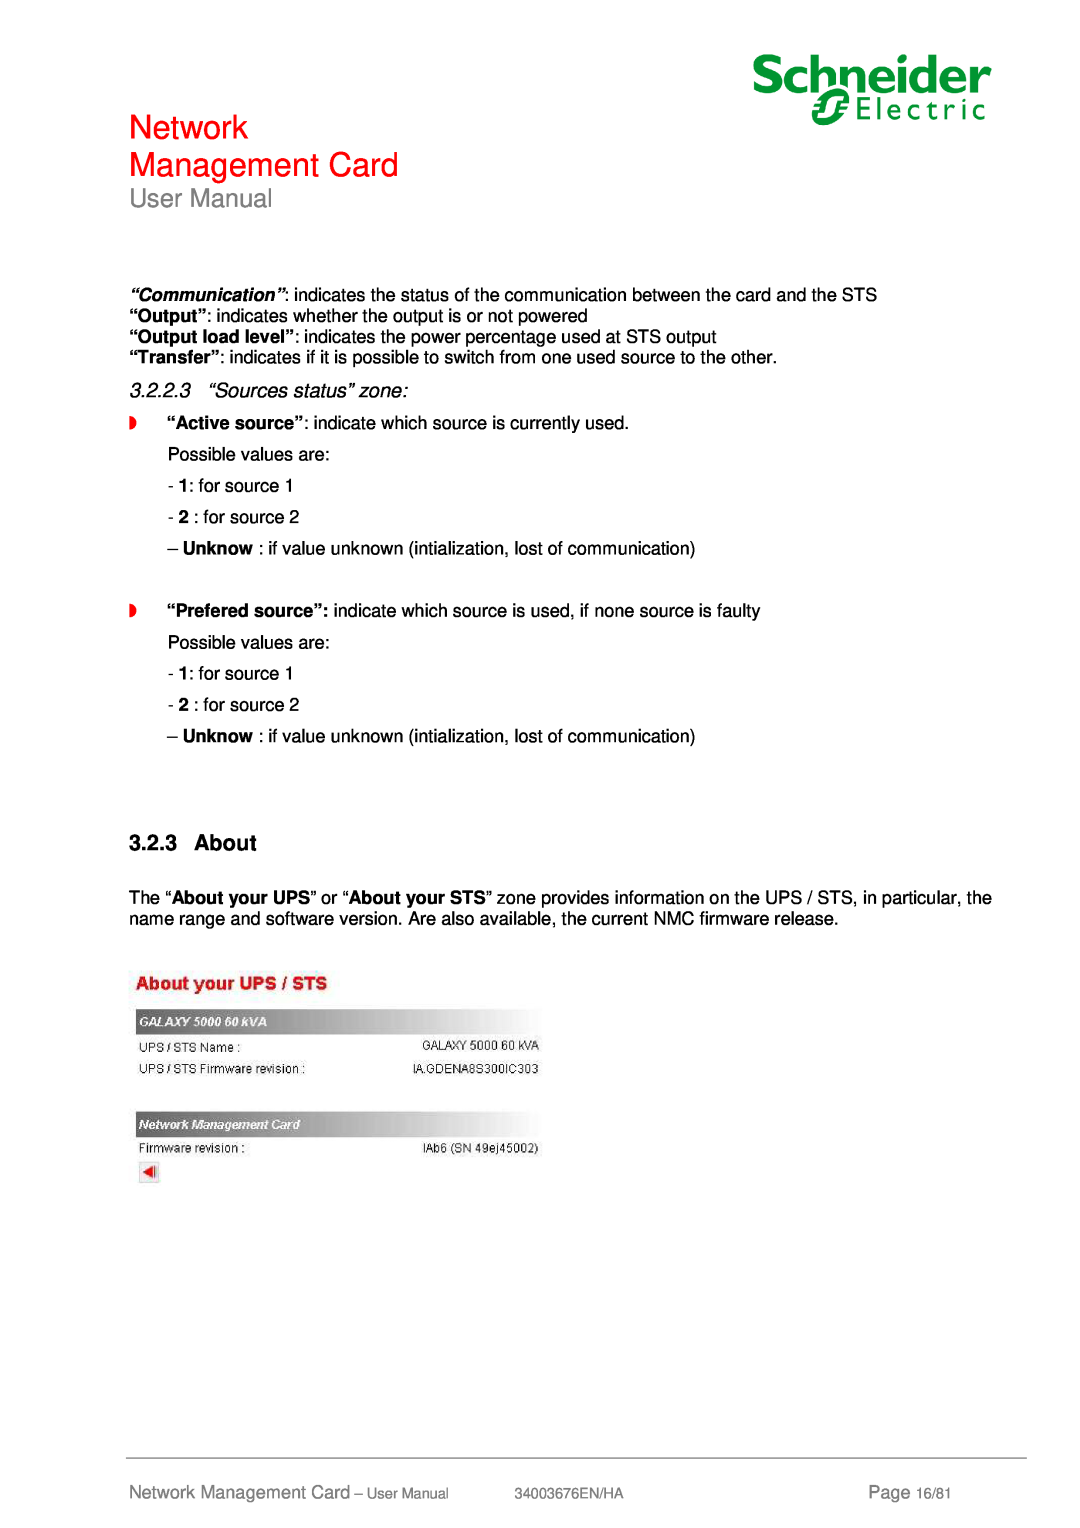 Schneider Electric 66846, 66074 user manual About, Network Management Card - User Manual, Page 16/81 